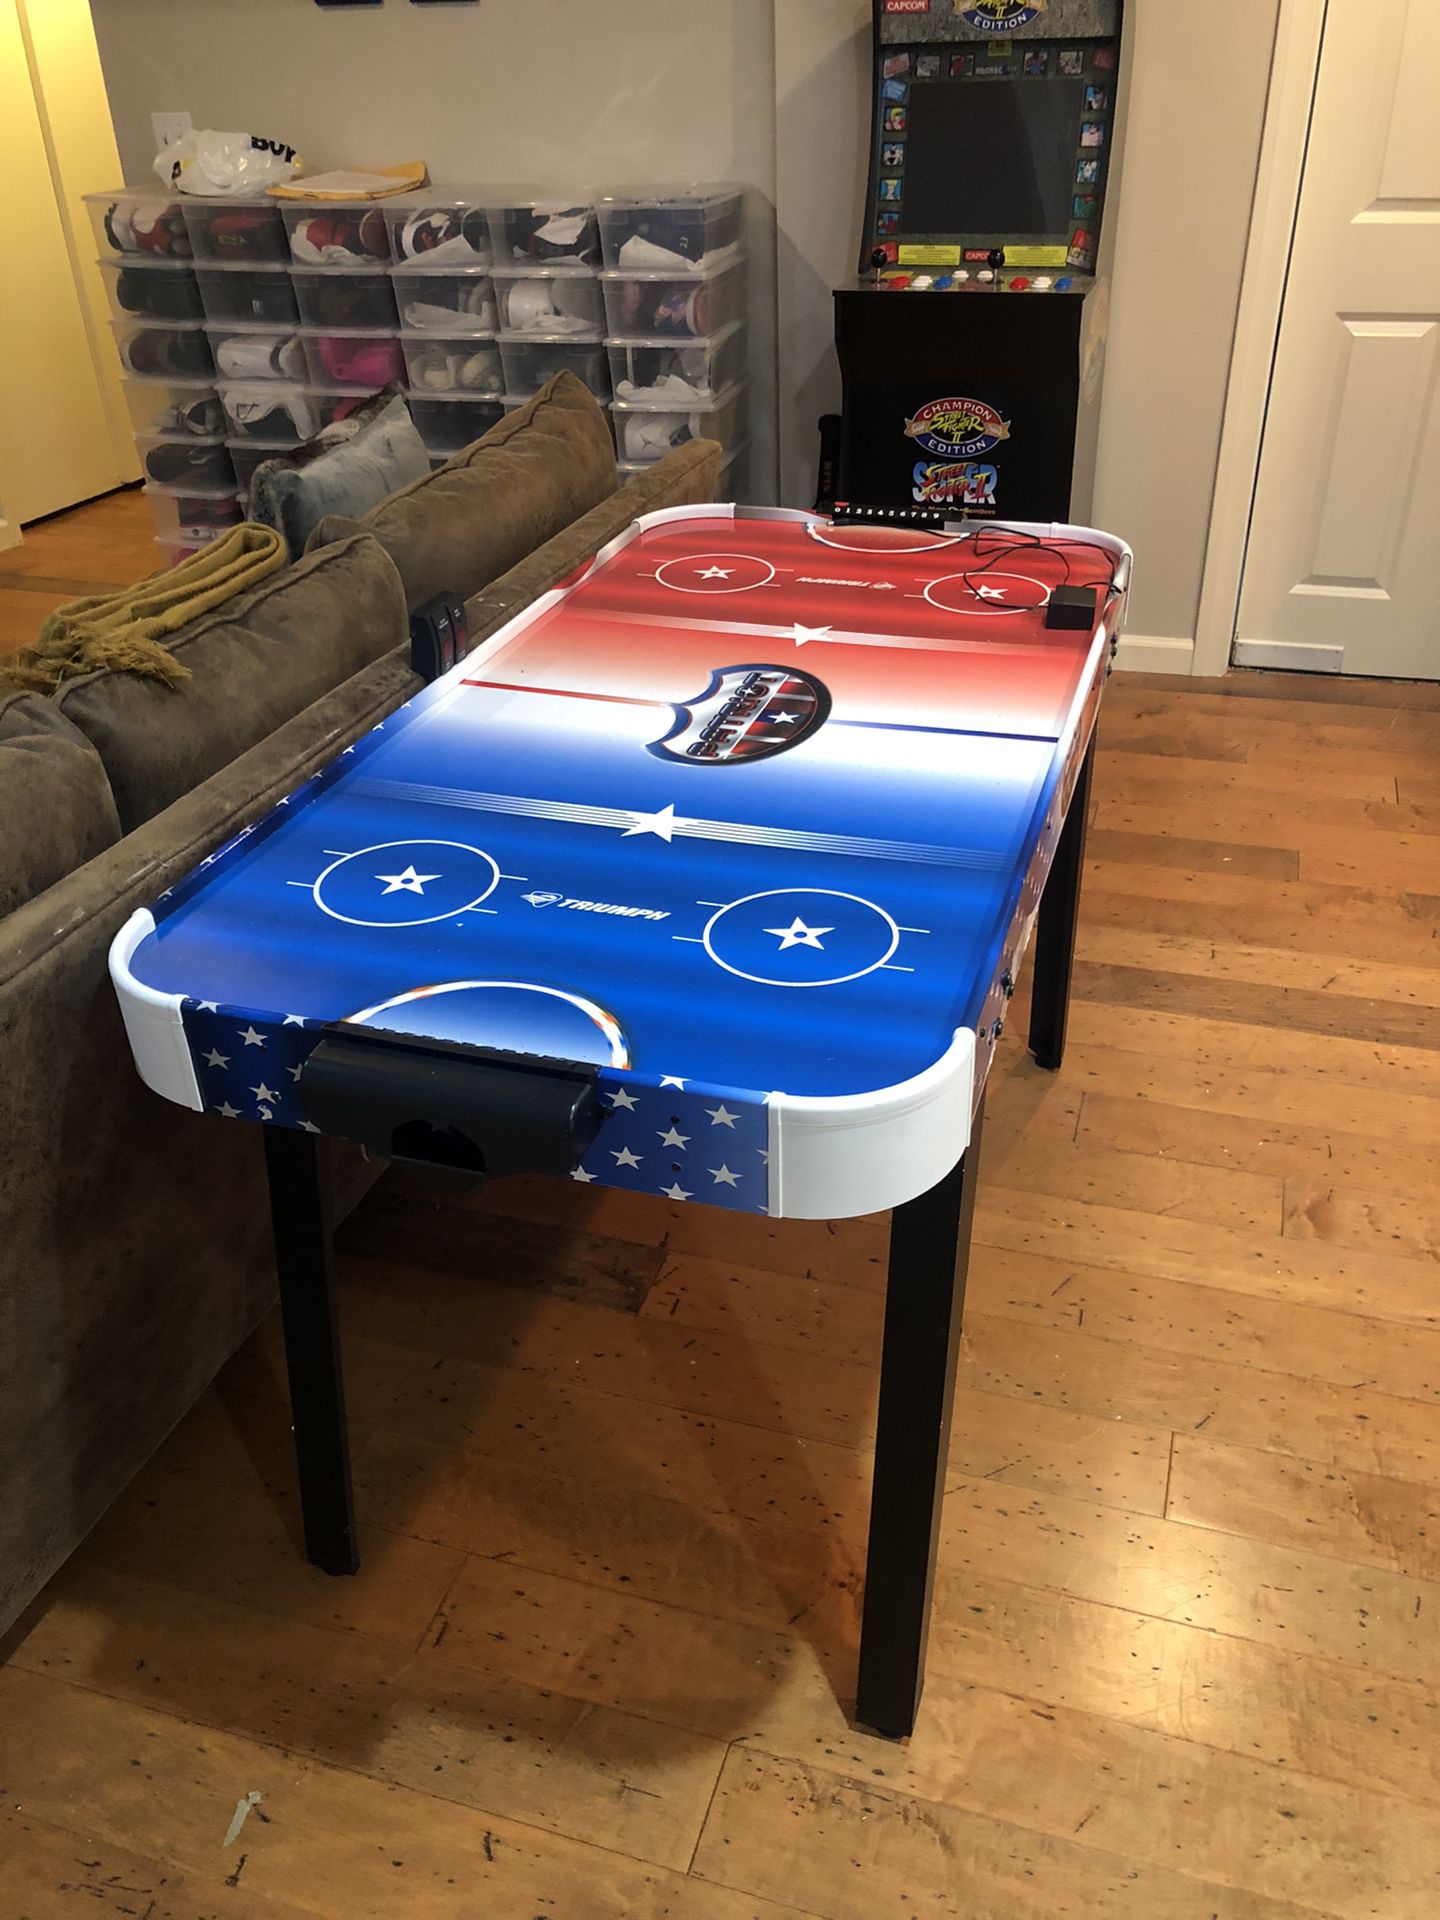 Air Hockey Table for sale. Lite use $75